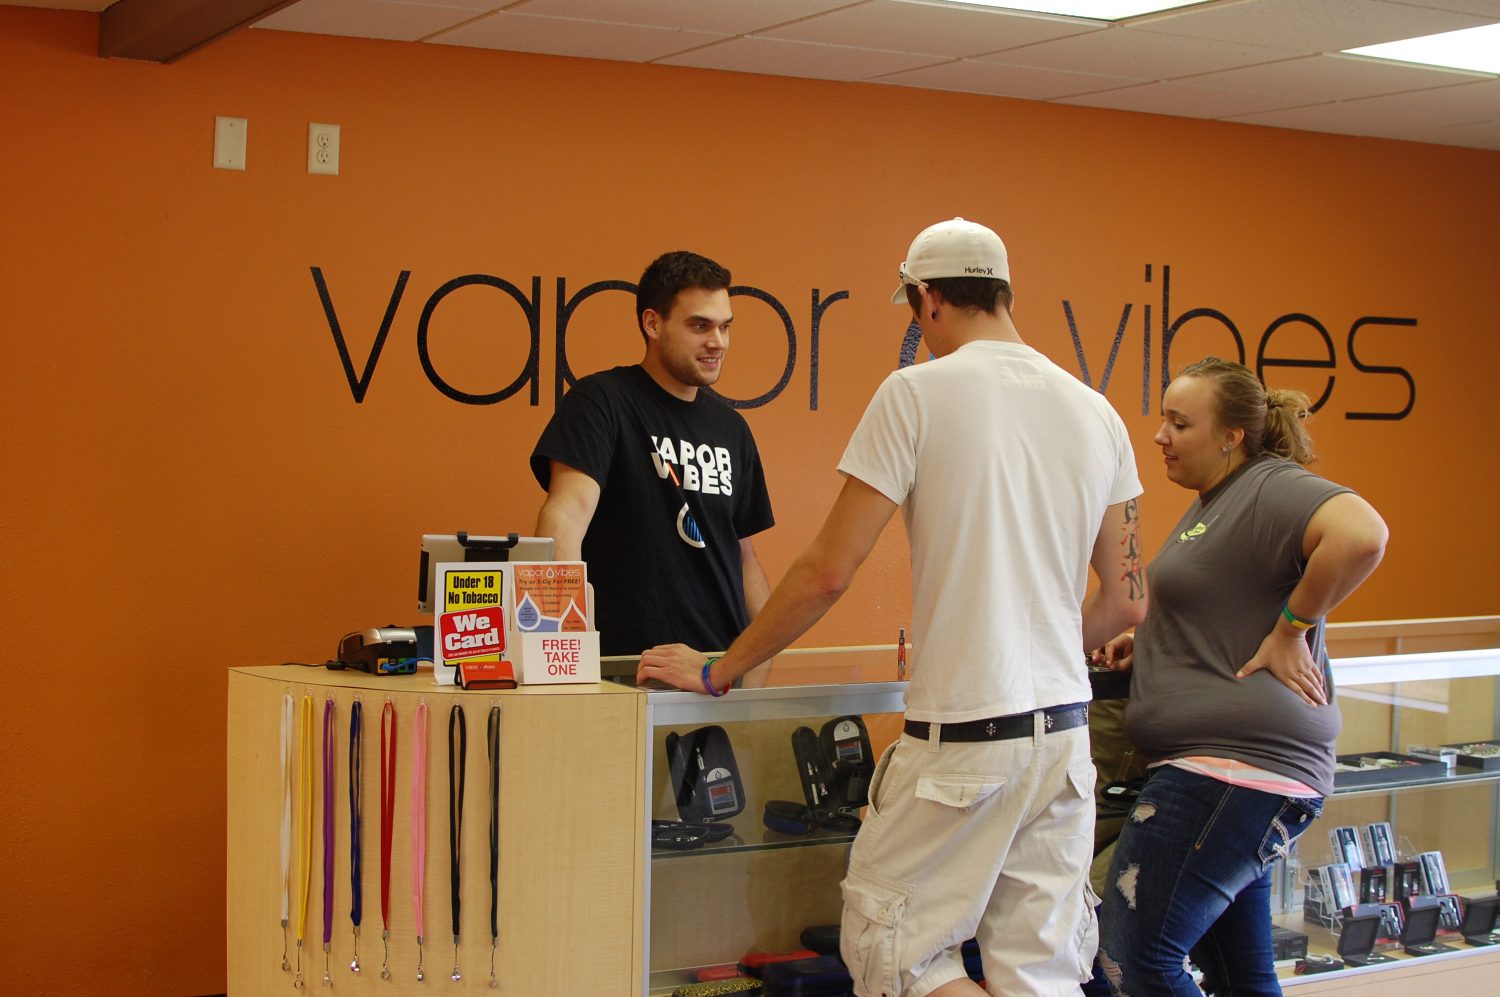 Owner Dave Delsing in Vapor Vibes shop, located on Gilmore Avenue, talking with potential new customers.
ANDREA BAUTCH